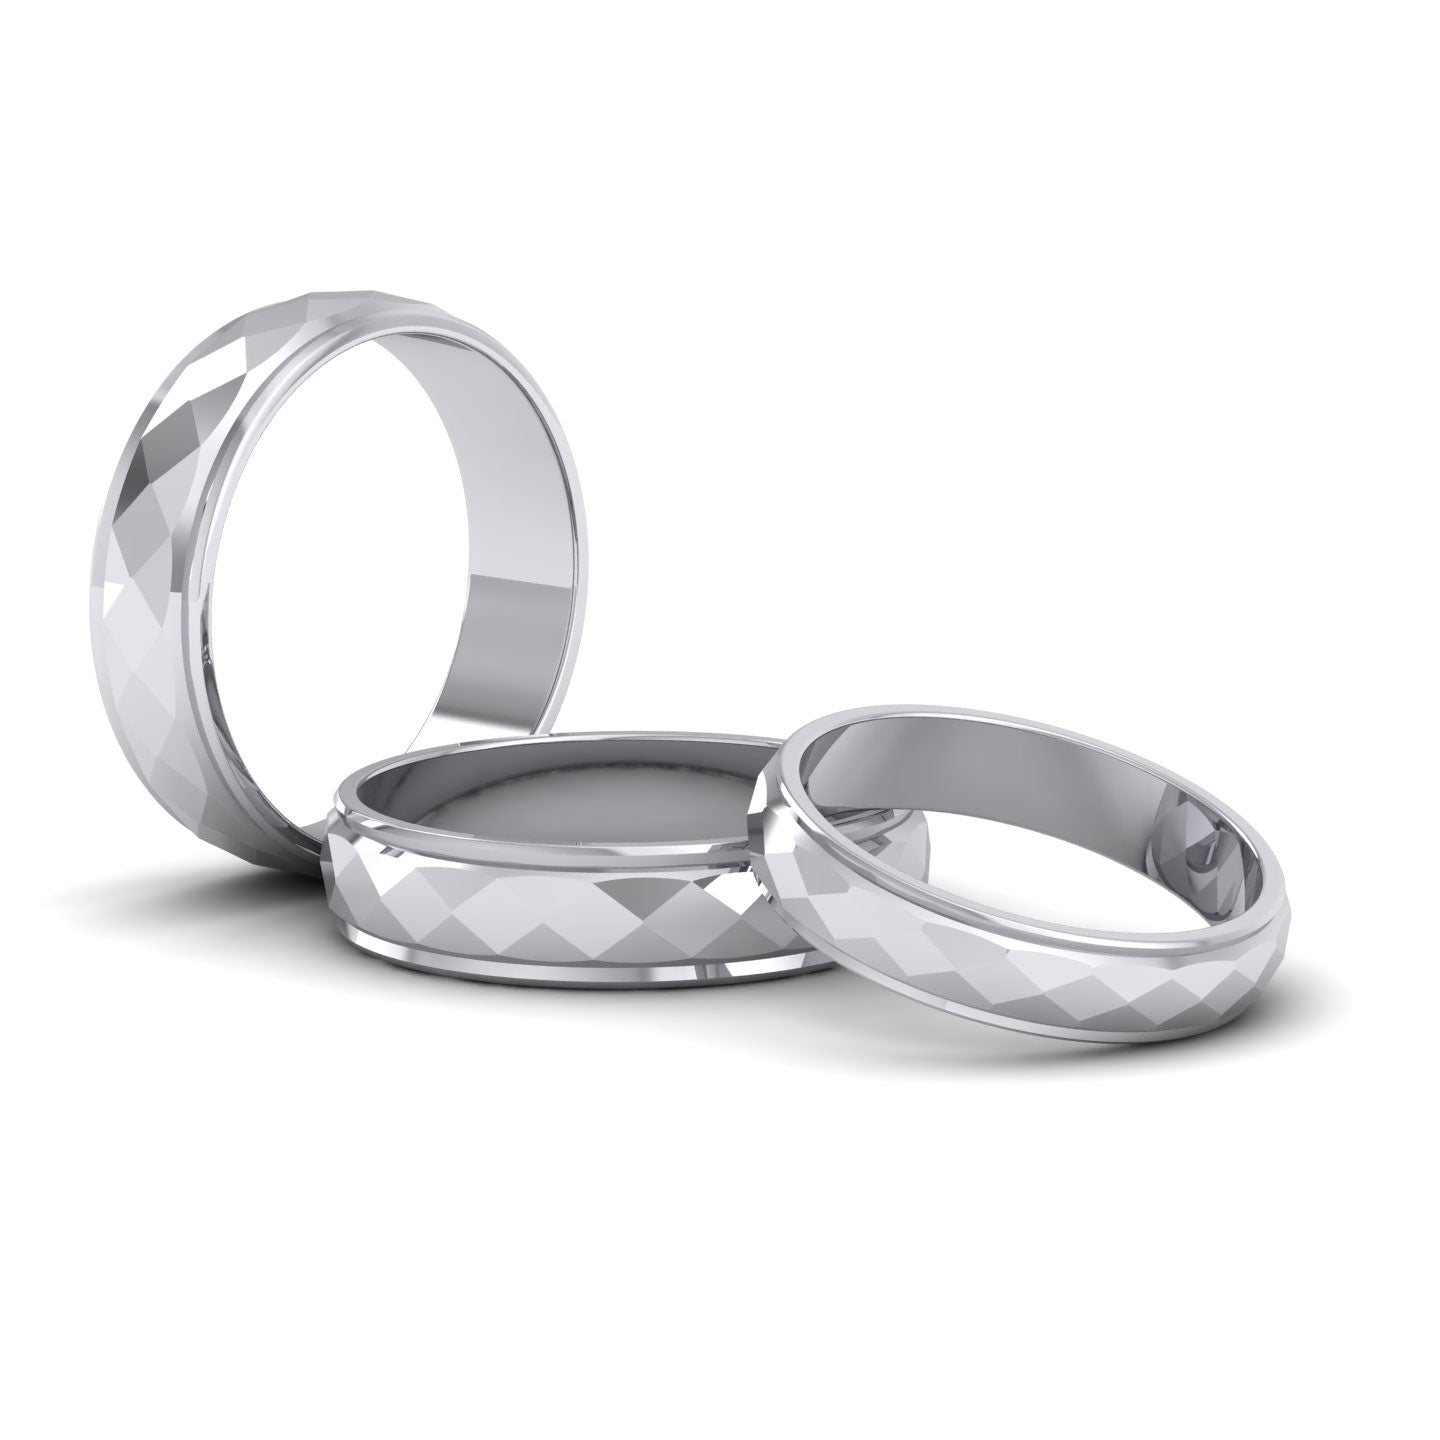 Facet And Line Pattern 18ct White Gold 6mm Wedding Ring